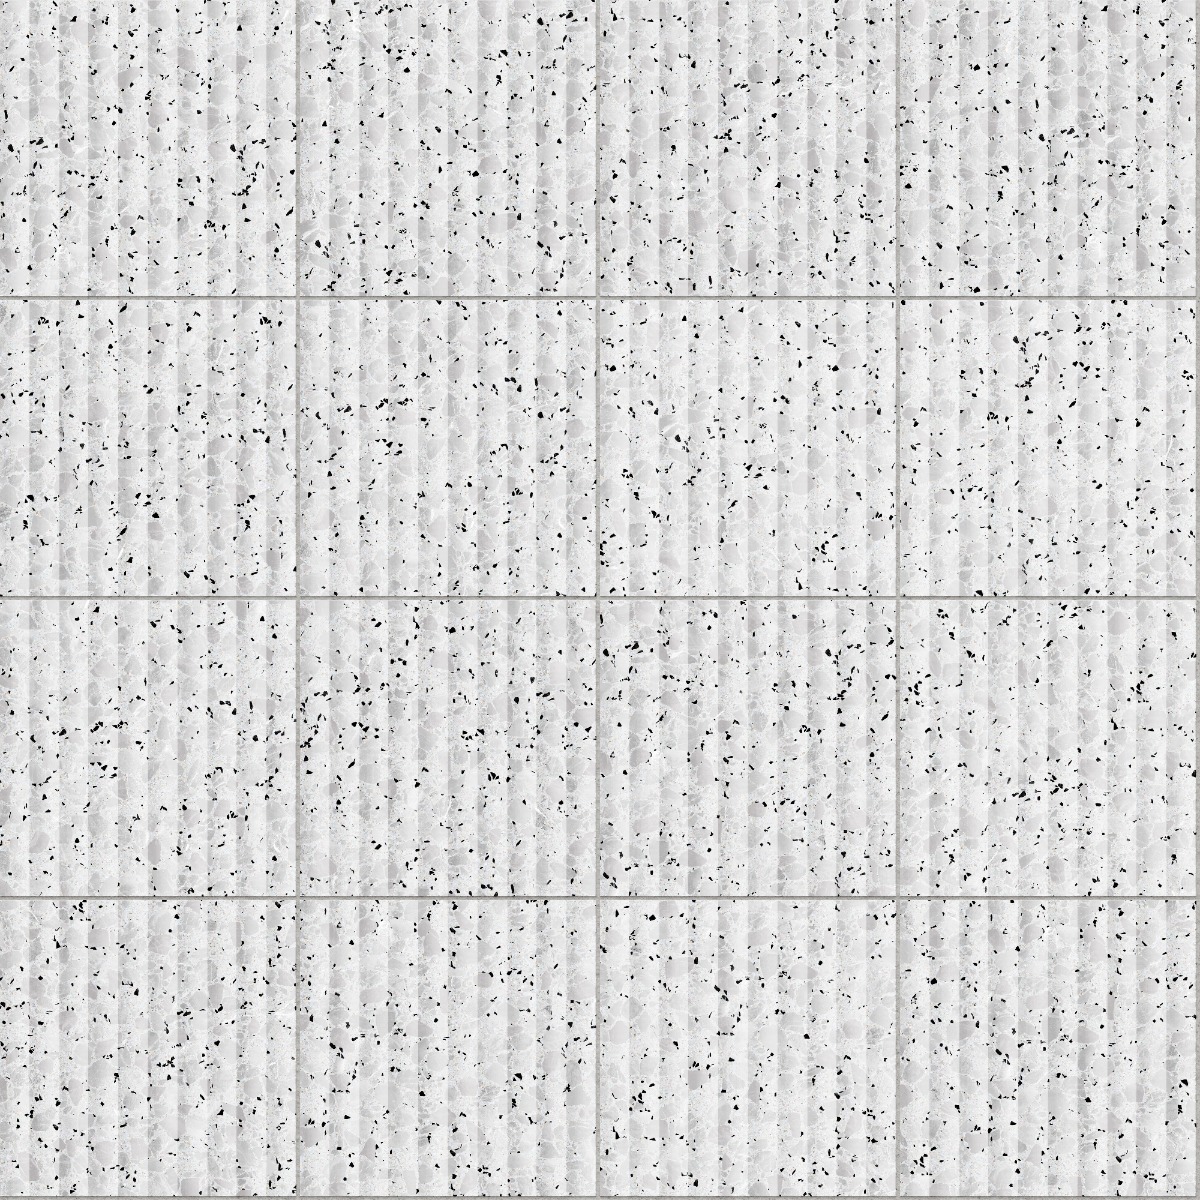 A seamless terrazzo texture with mono terrazzo units arranged in a Stack pattern